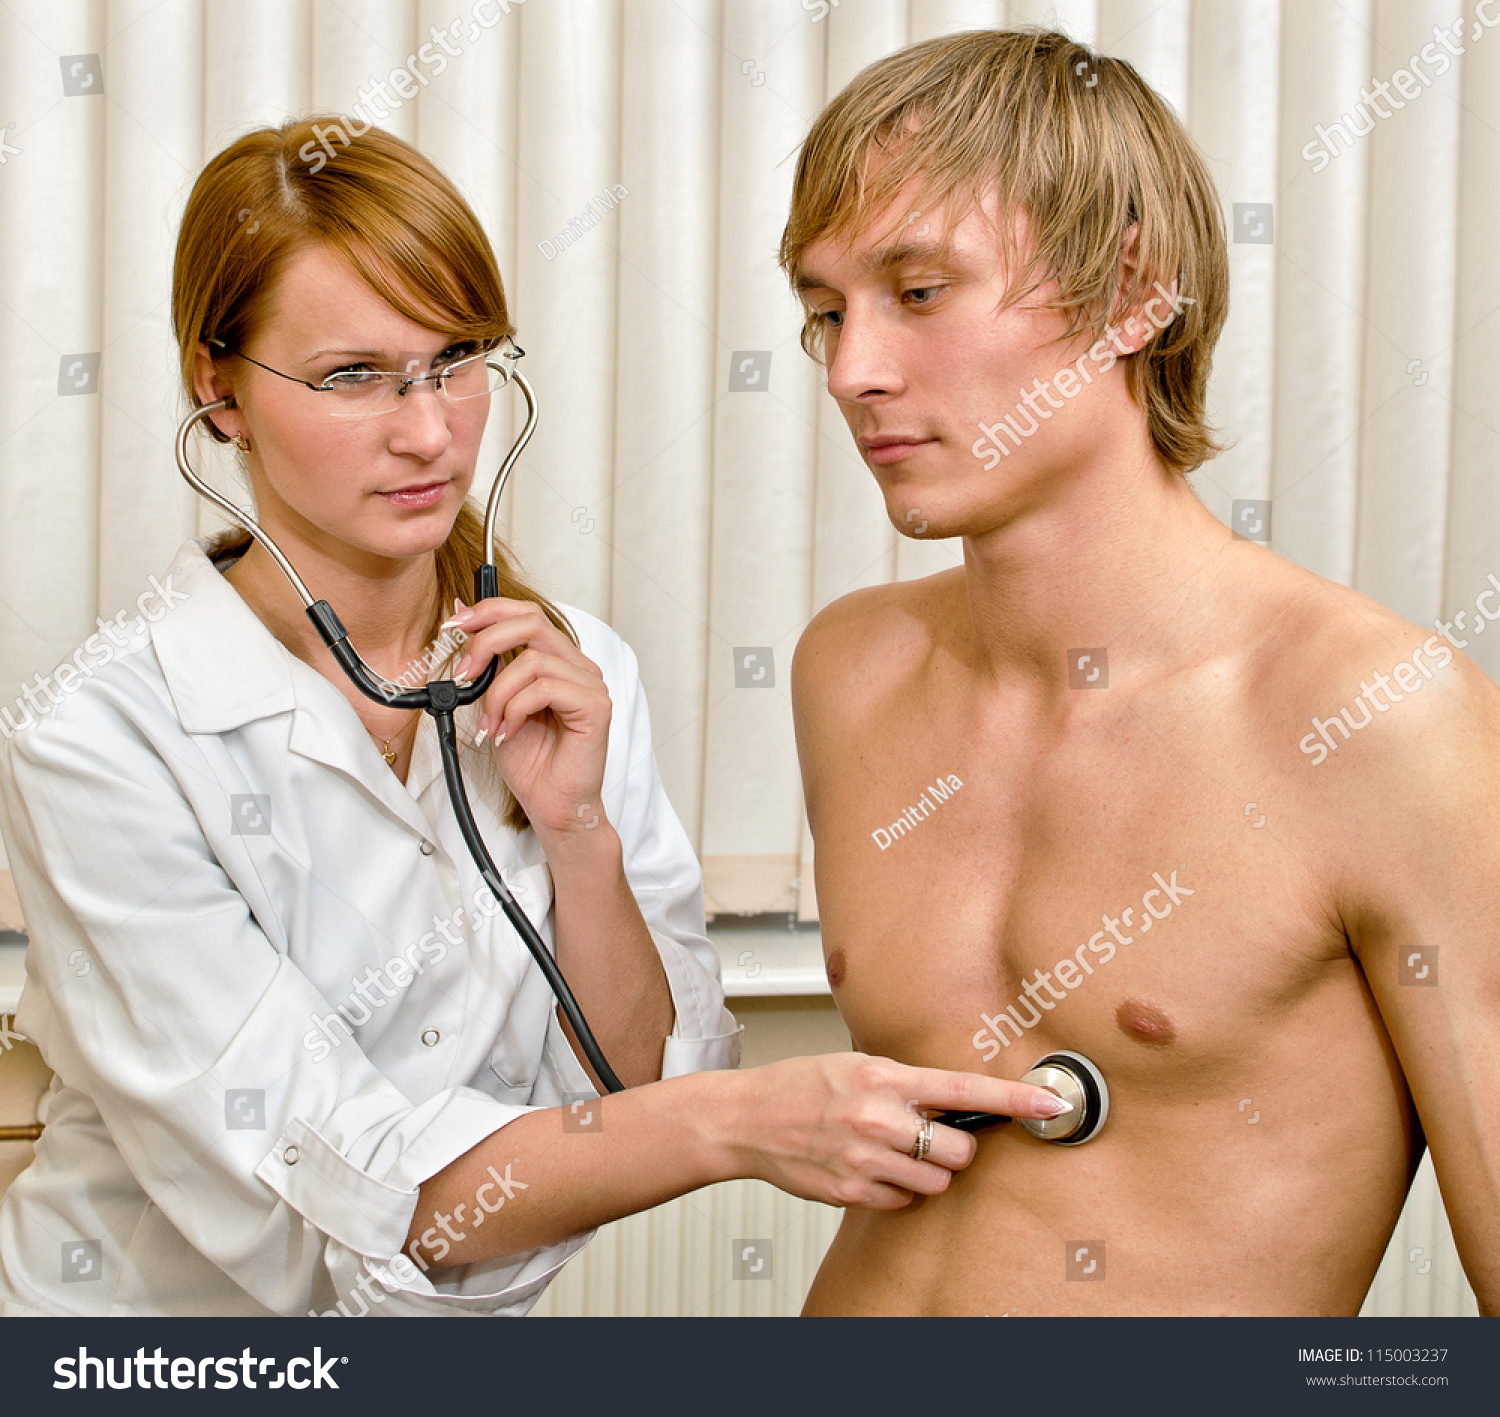 corey vesper recommends female doctor examining man pic